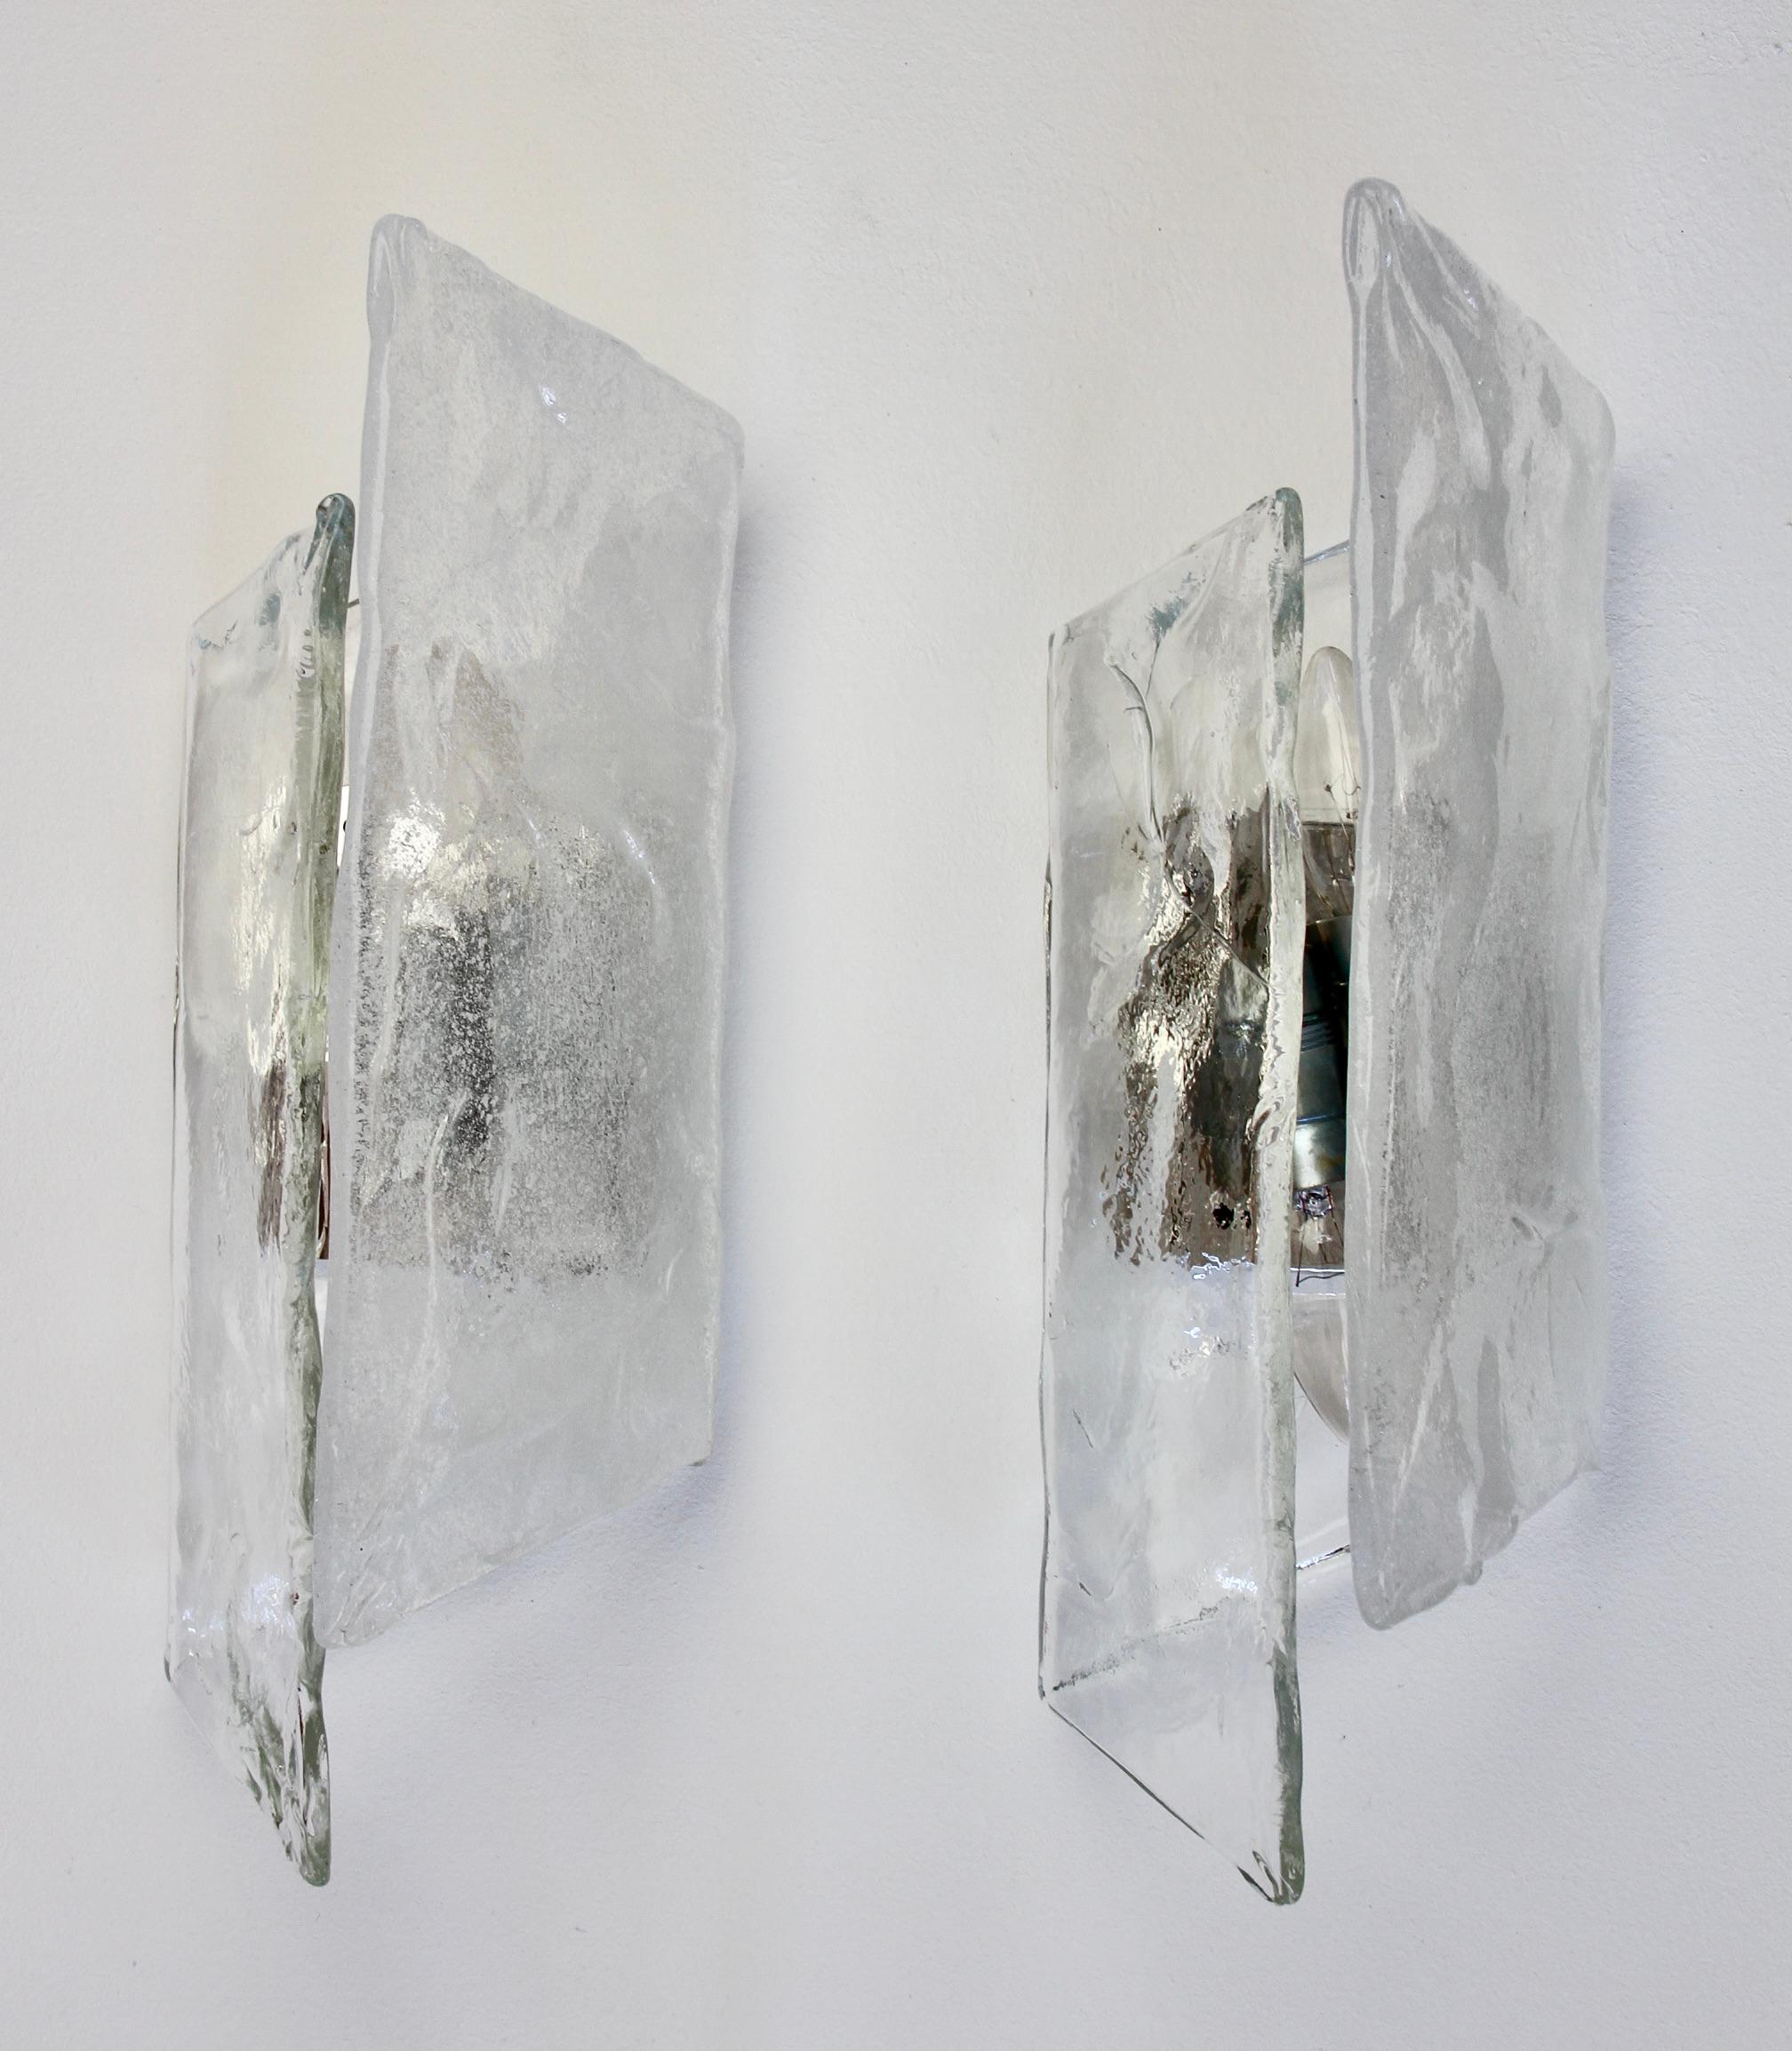 Polished Carlo Nason Pair of Kalmar Mid-Century Murano Glass Wall Lights or Sconces 1970s For Sale